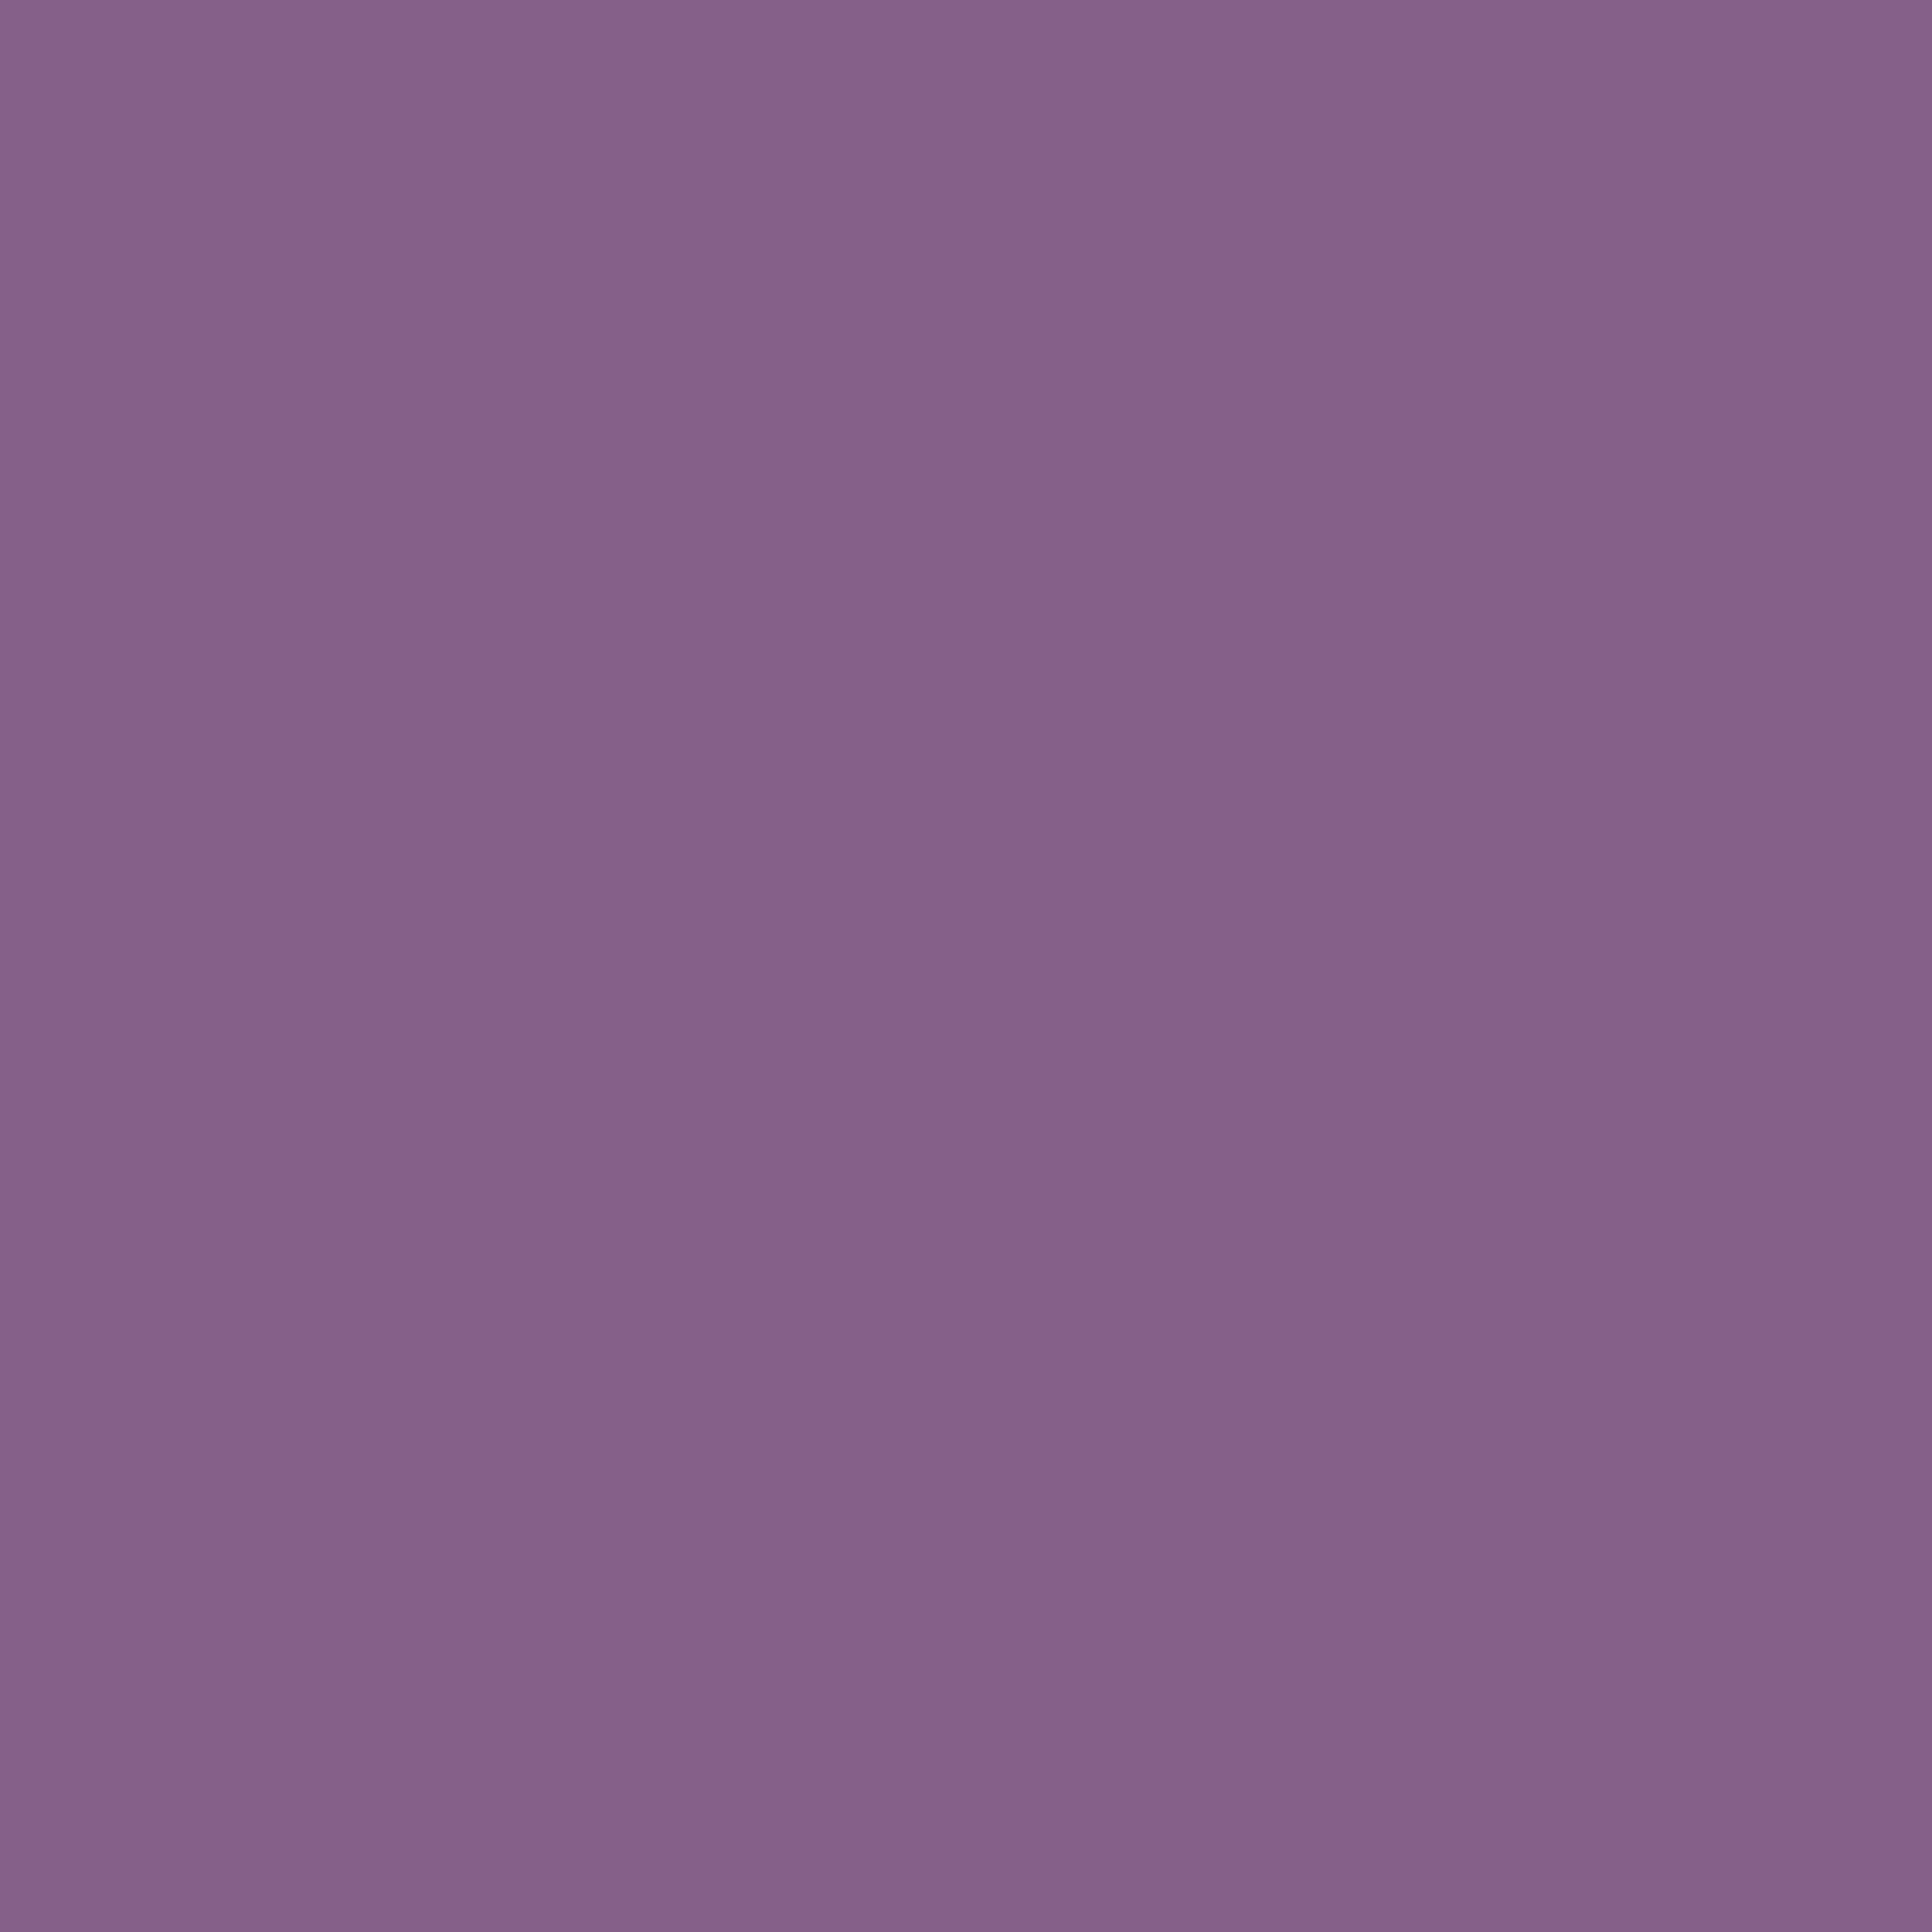 2732x2732 Chinese Violet Solid Color Background